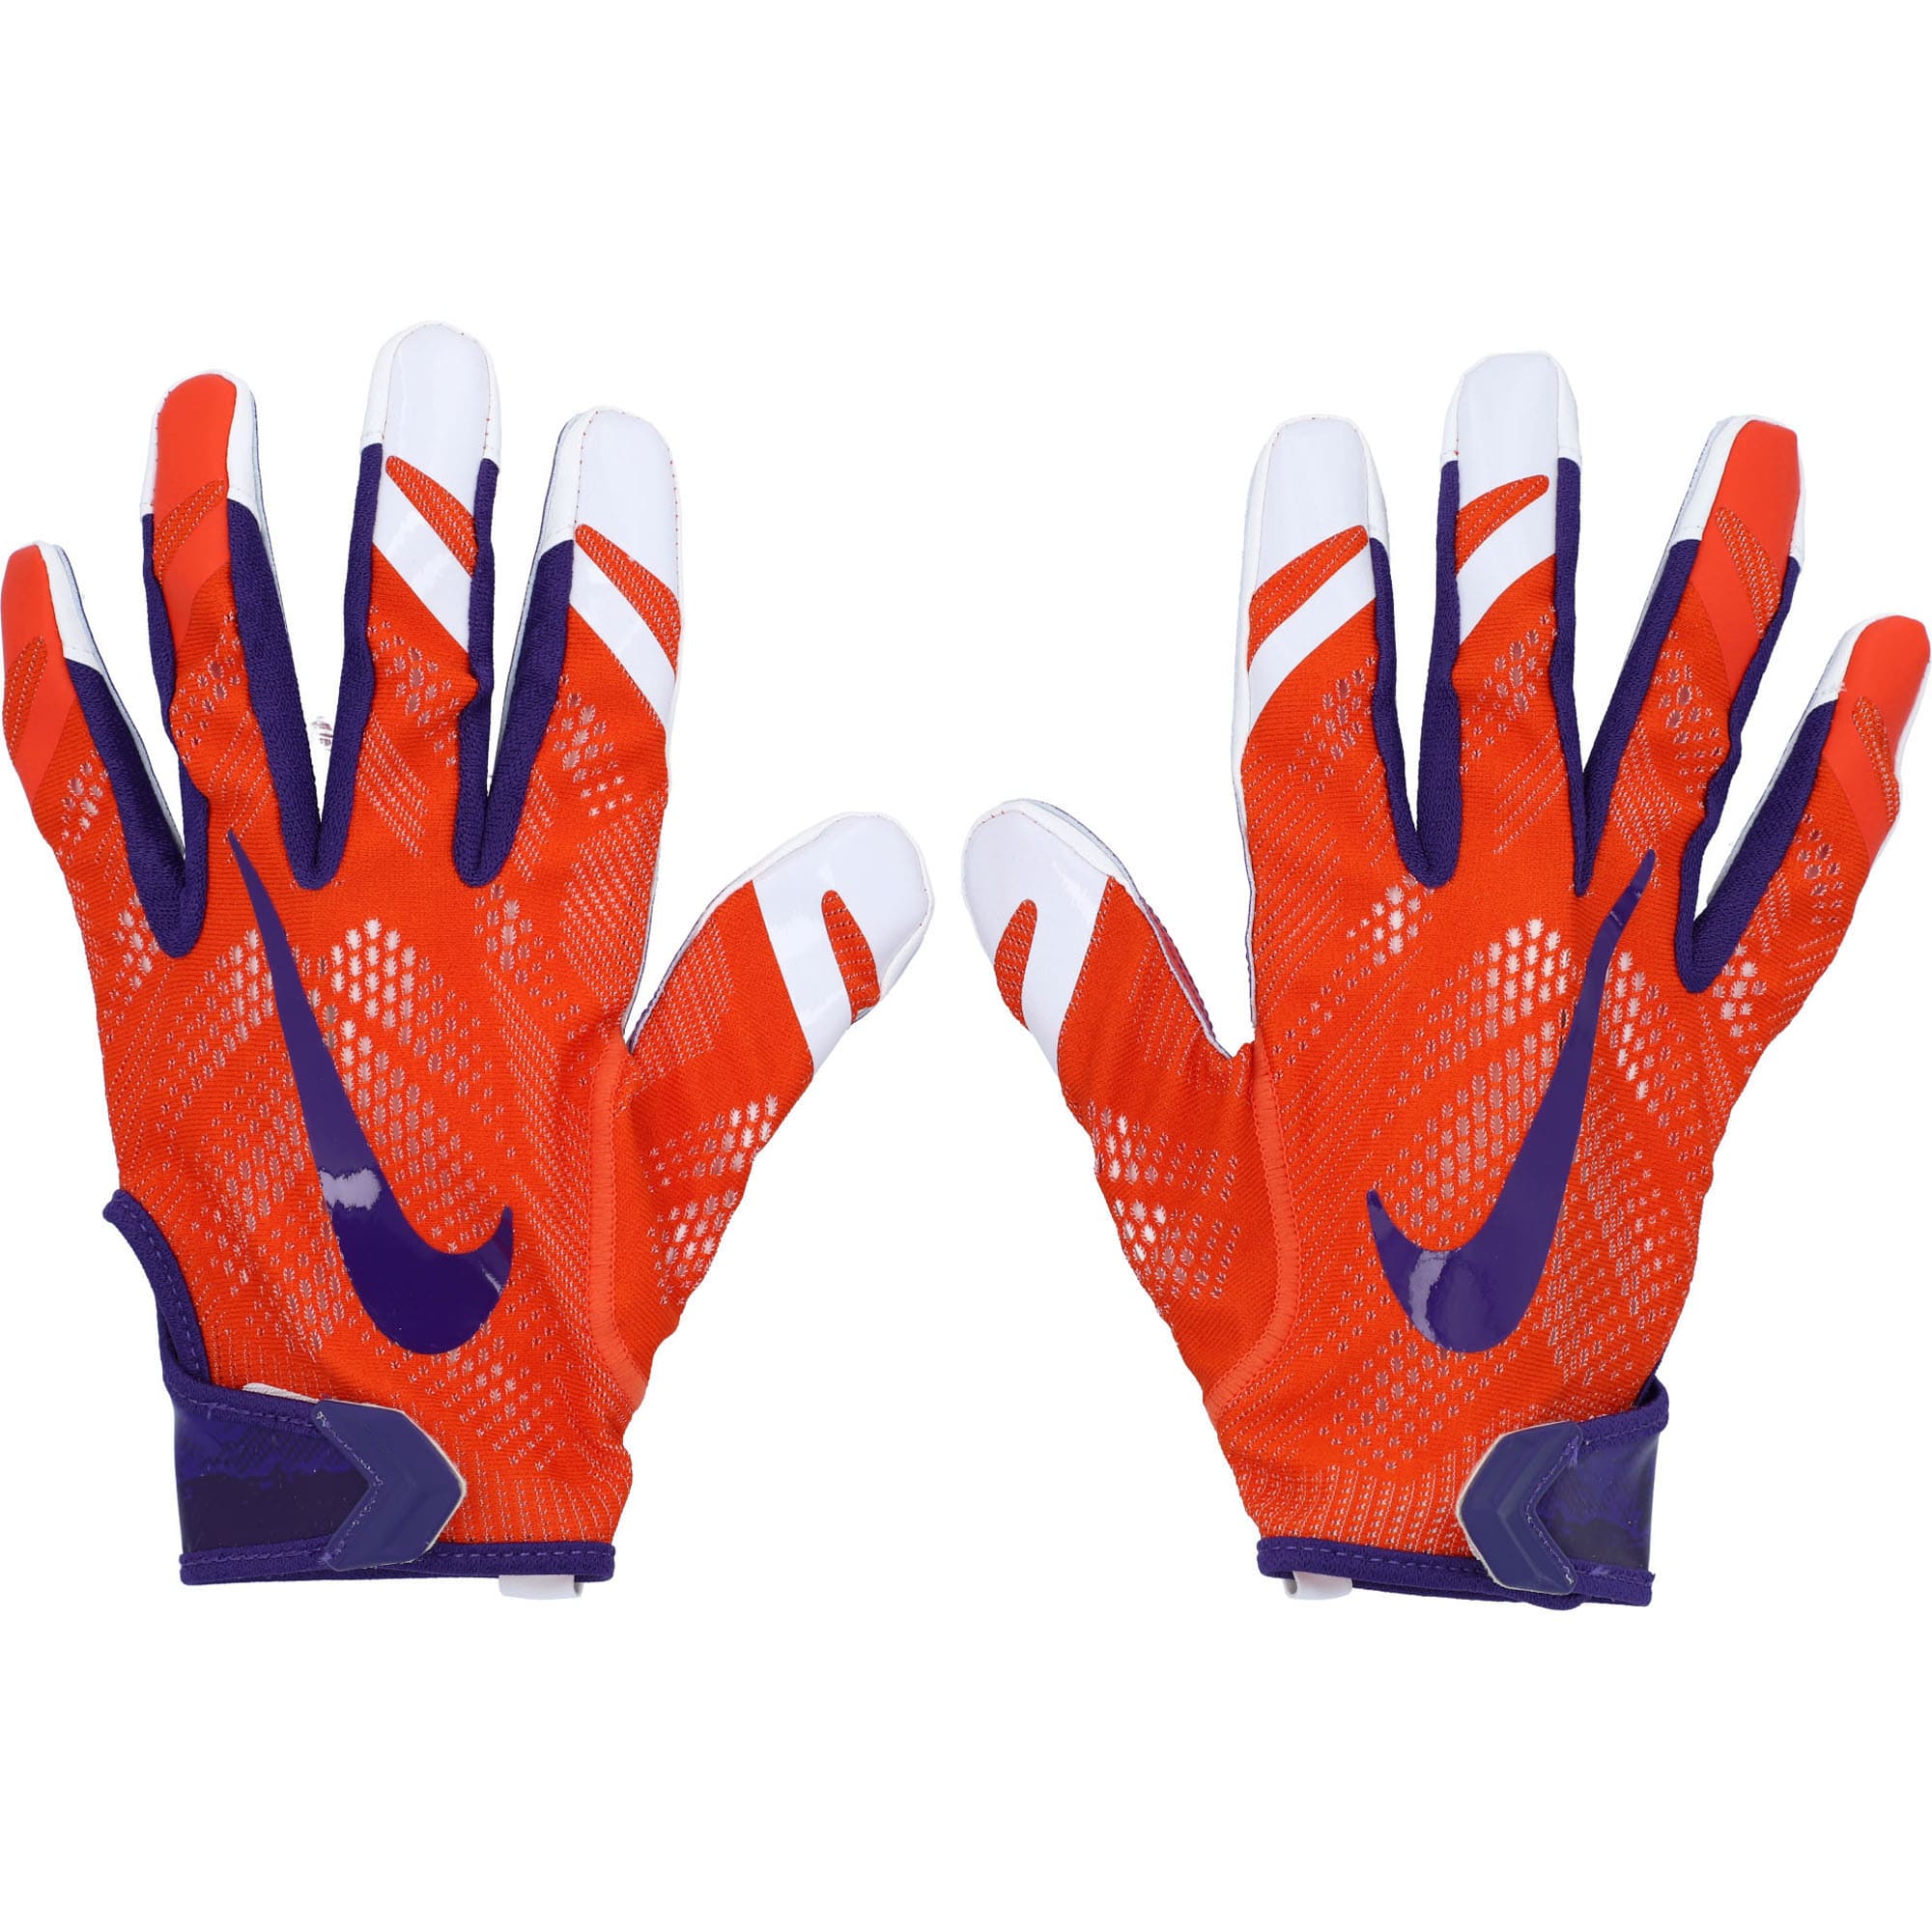 Clemson Tigers Team-Issued Orange and Purple Nike Vapor Knit Gloves from the Football Program